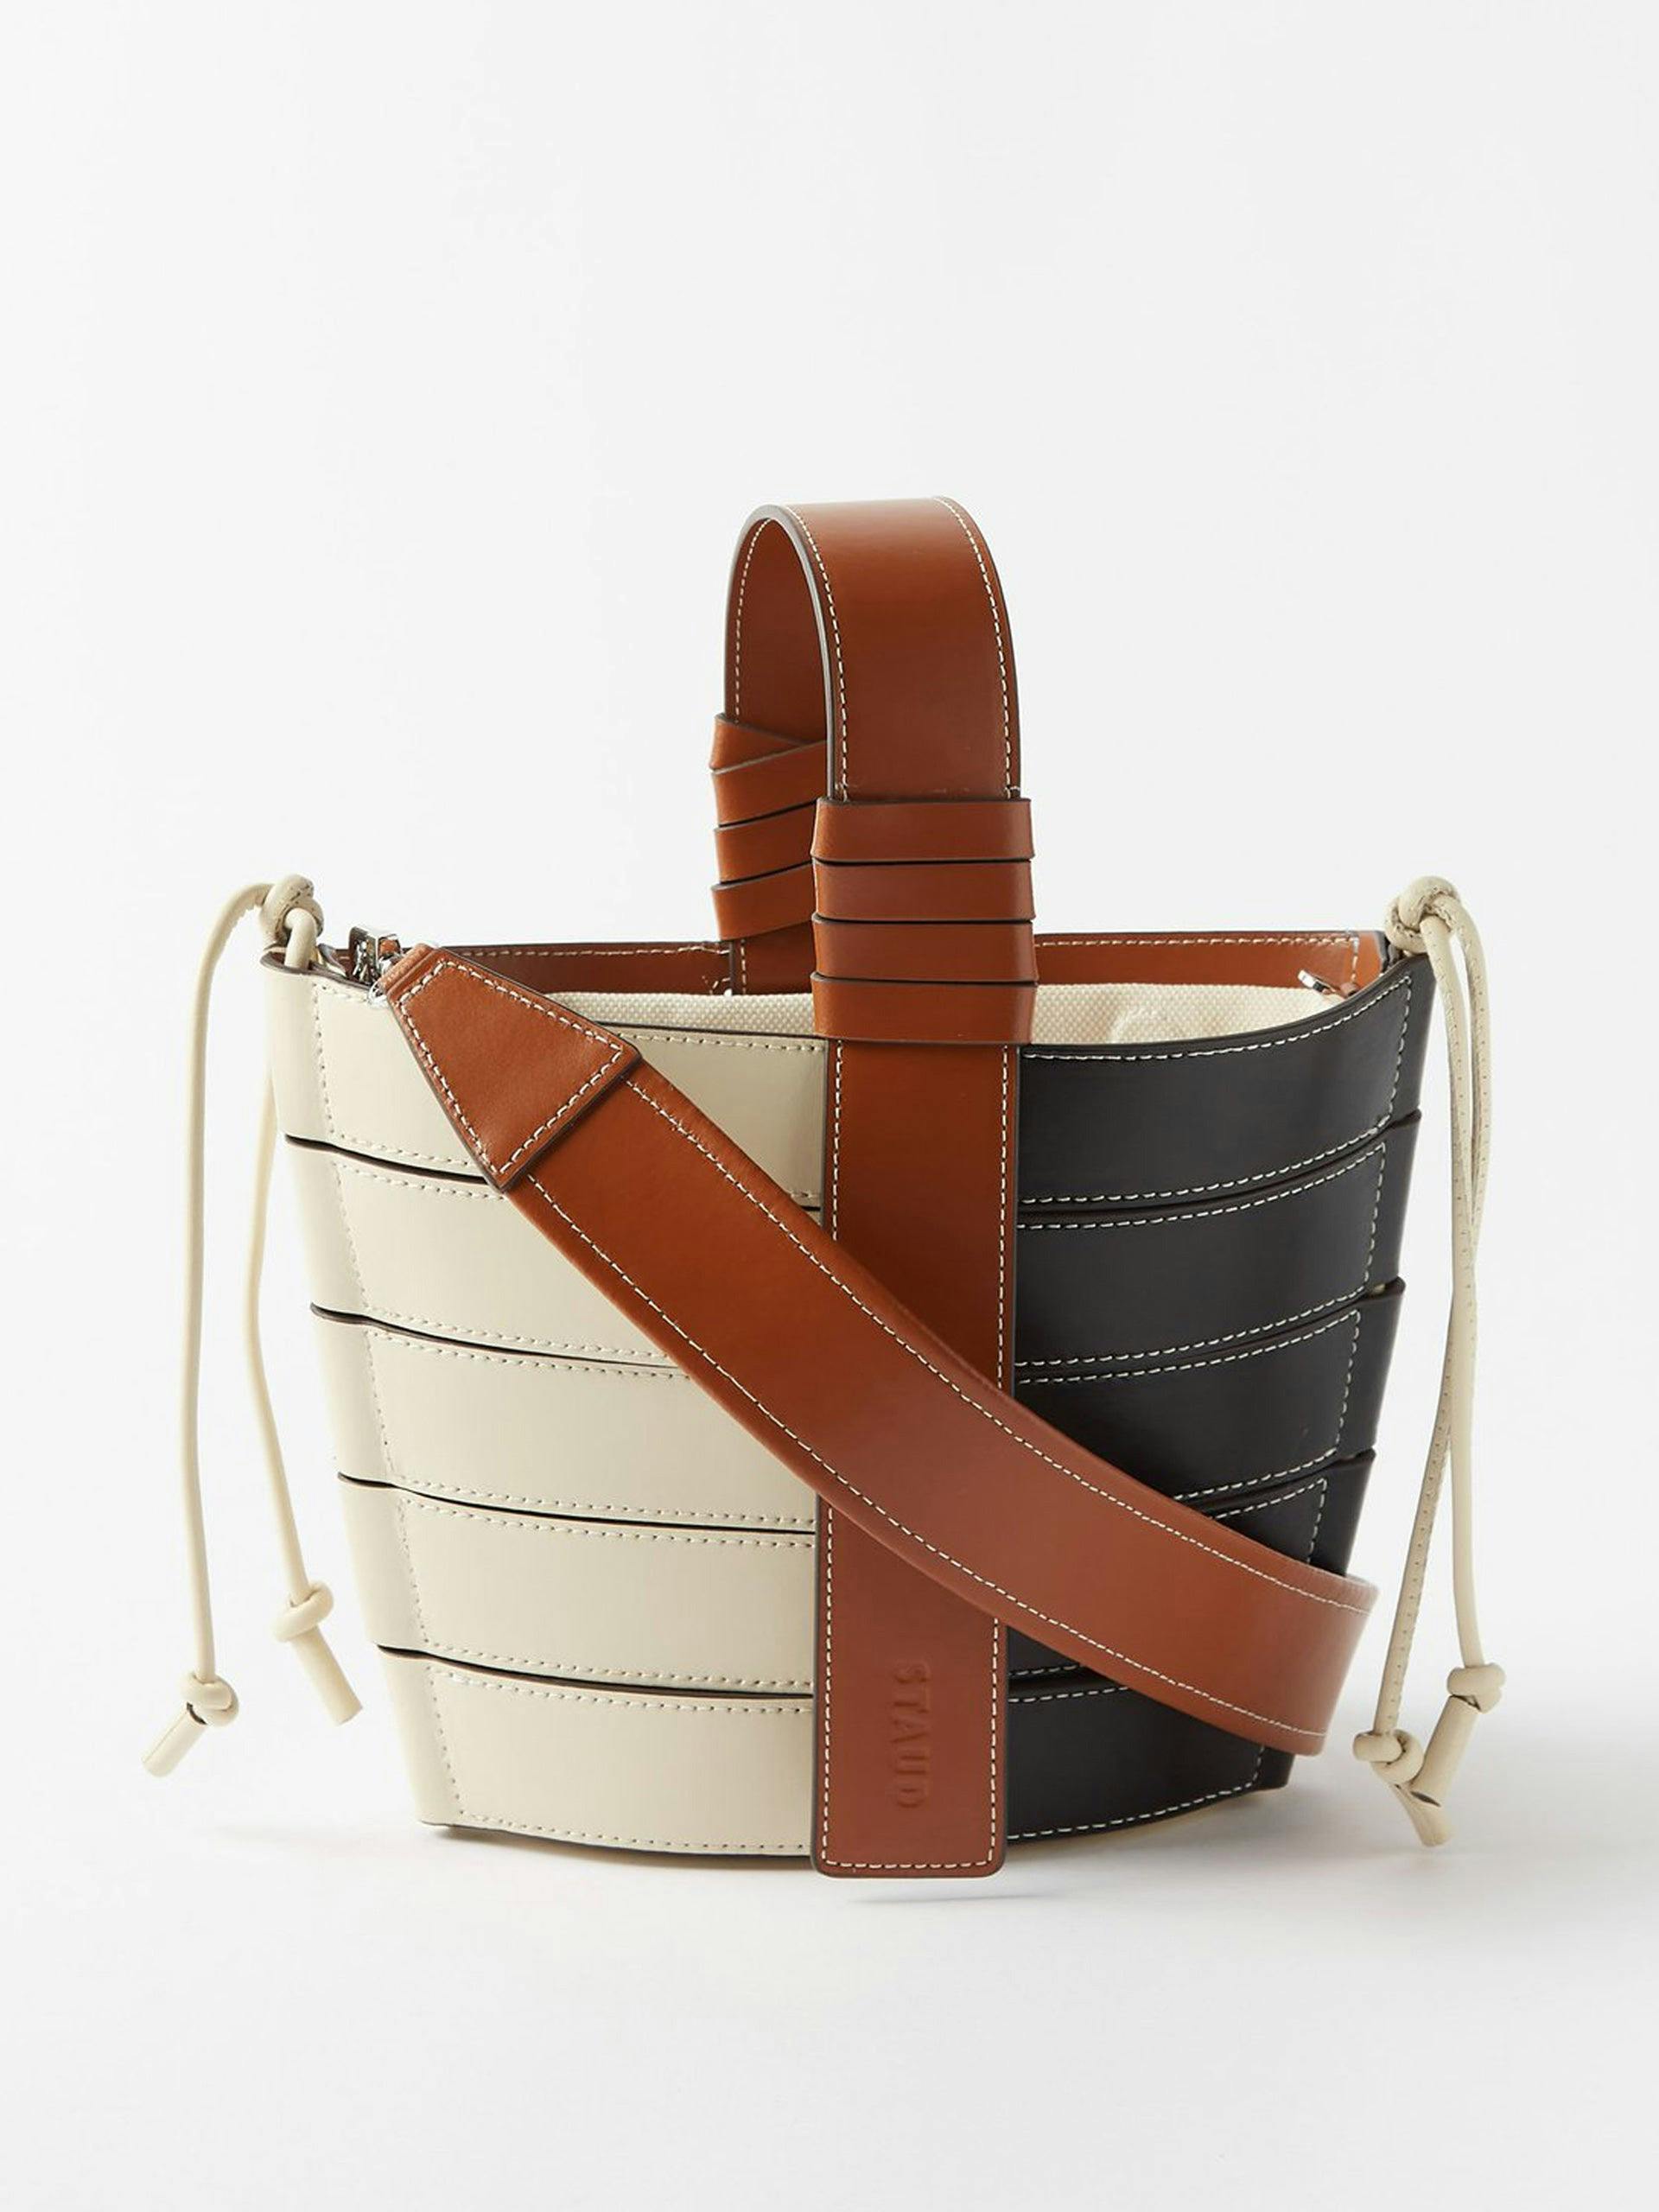 Black, brown and cream panelled leather tote bag